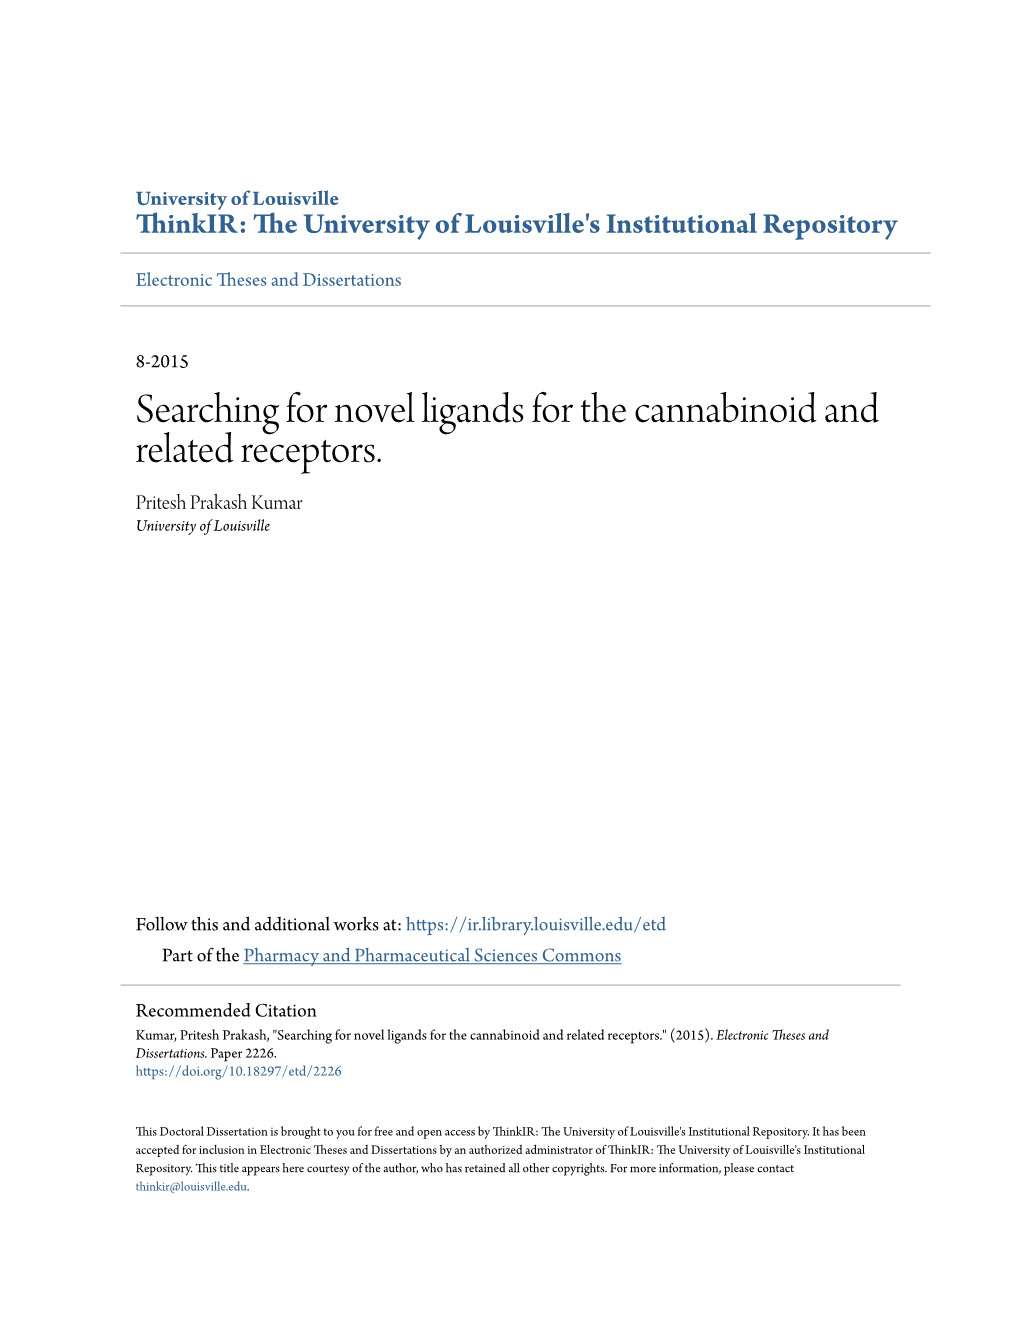 Searching for Novel Ligands for the Cannabinoid and Related Receptors